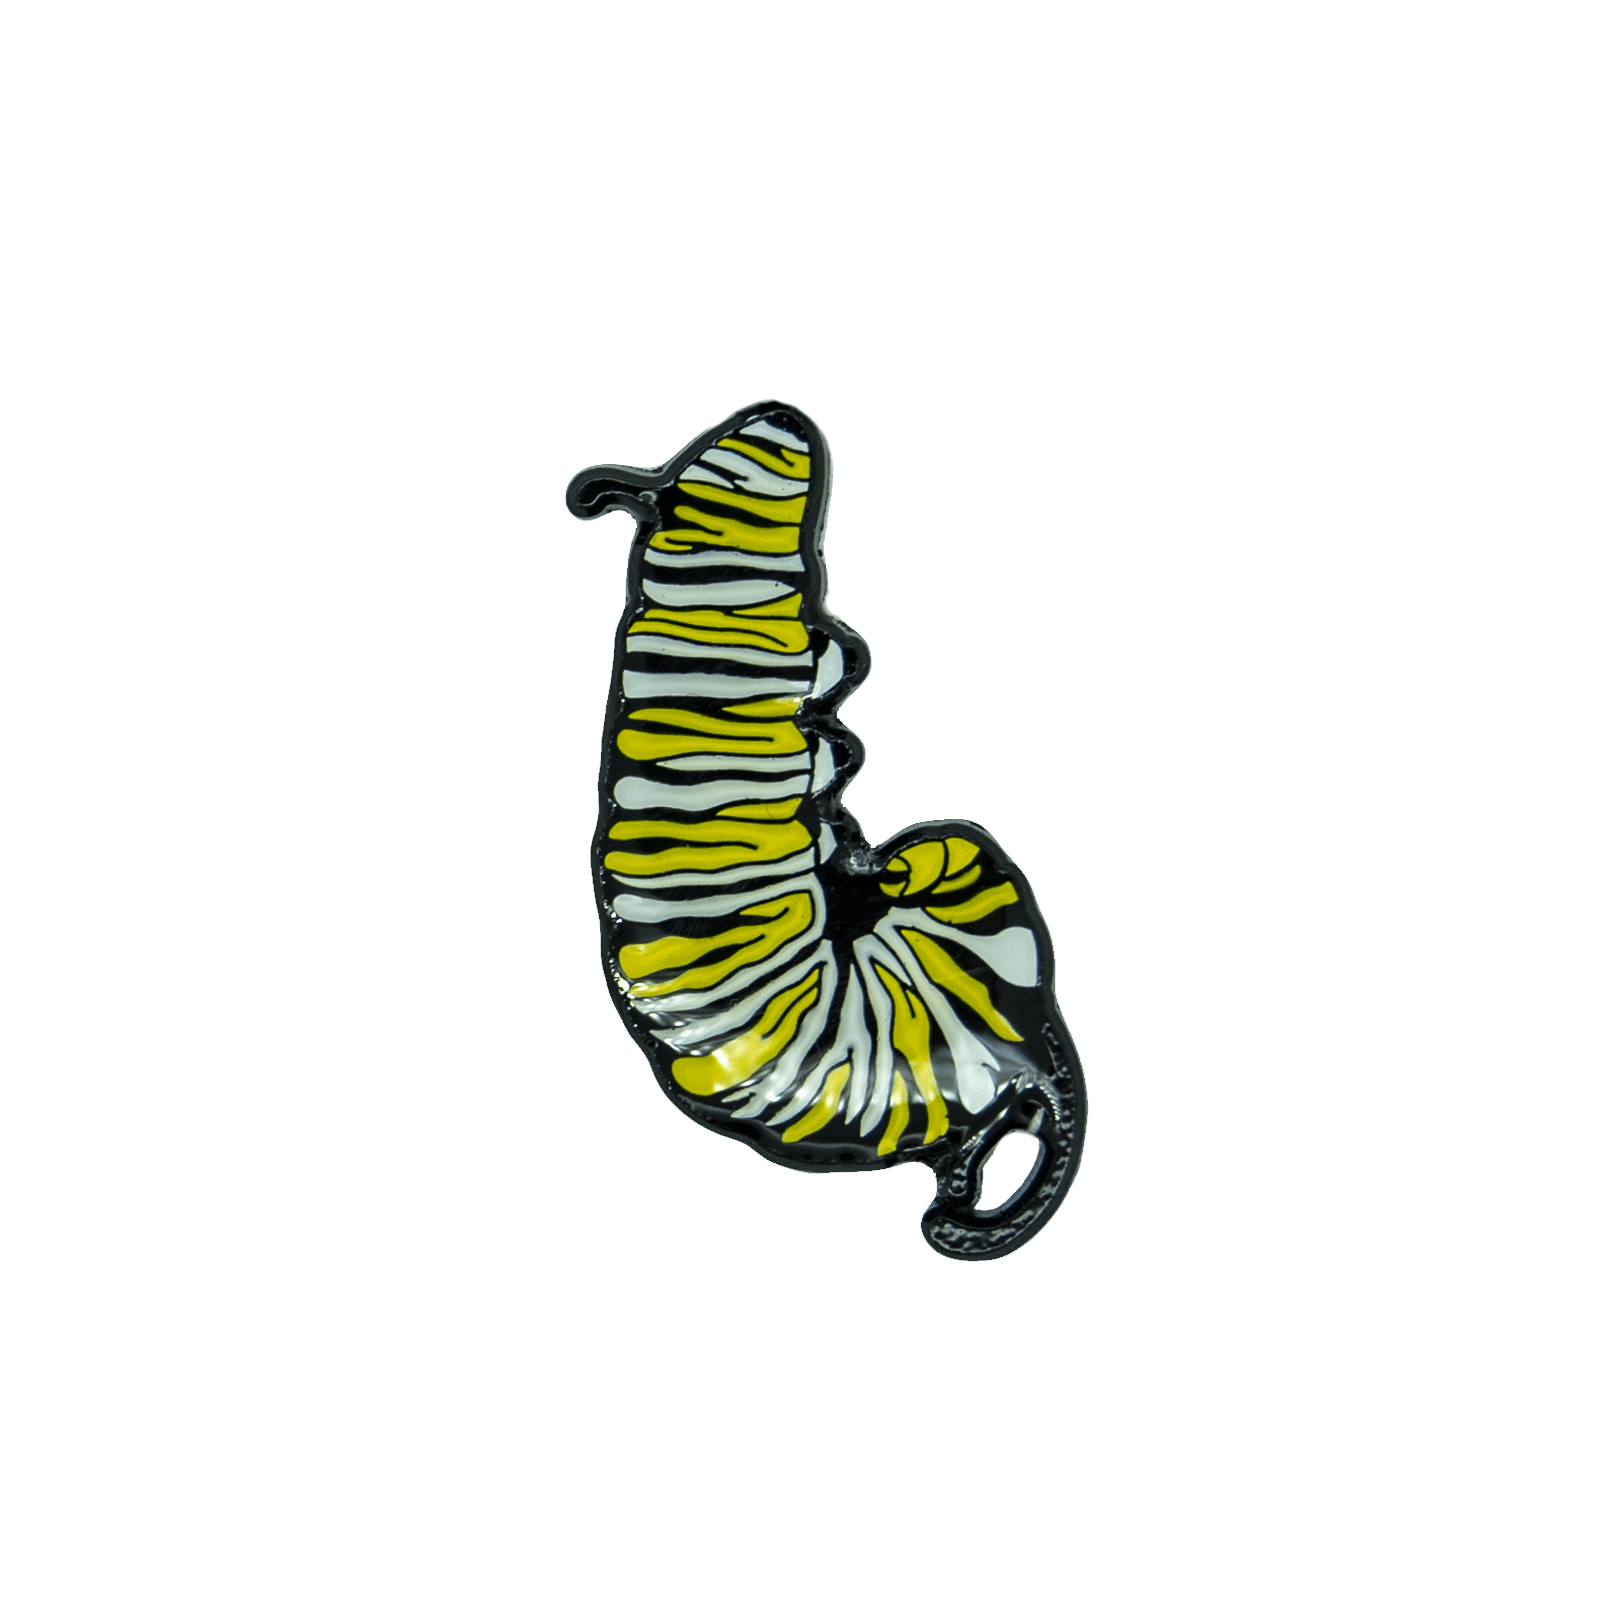 A black, white, and yellow enamel pin of the monarch caterpillar hanging in the J shape.